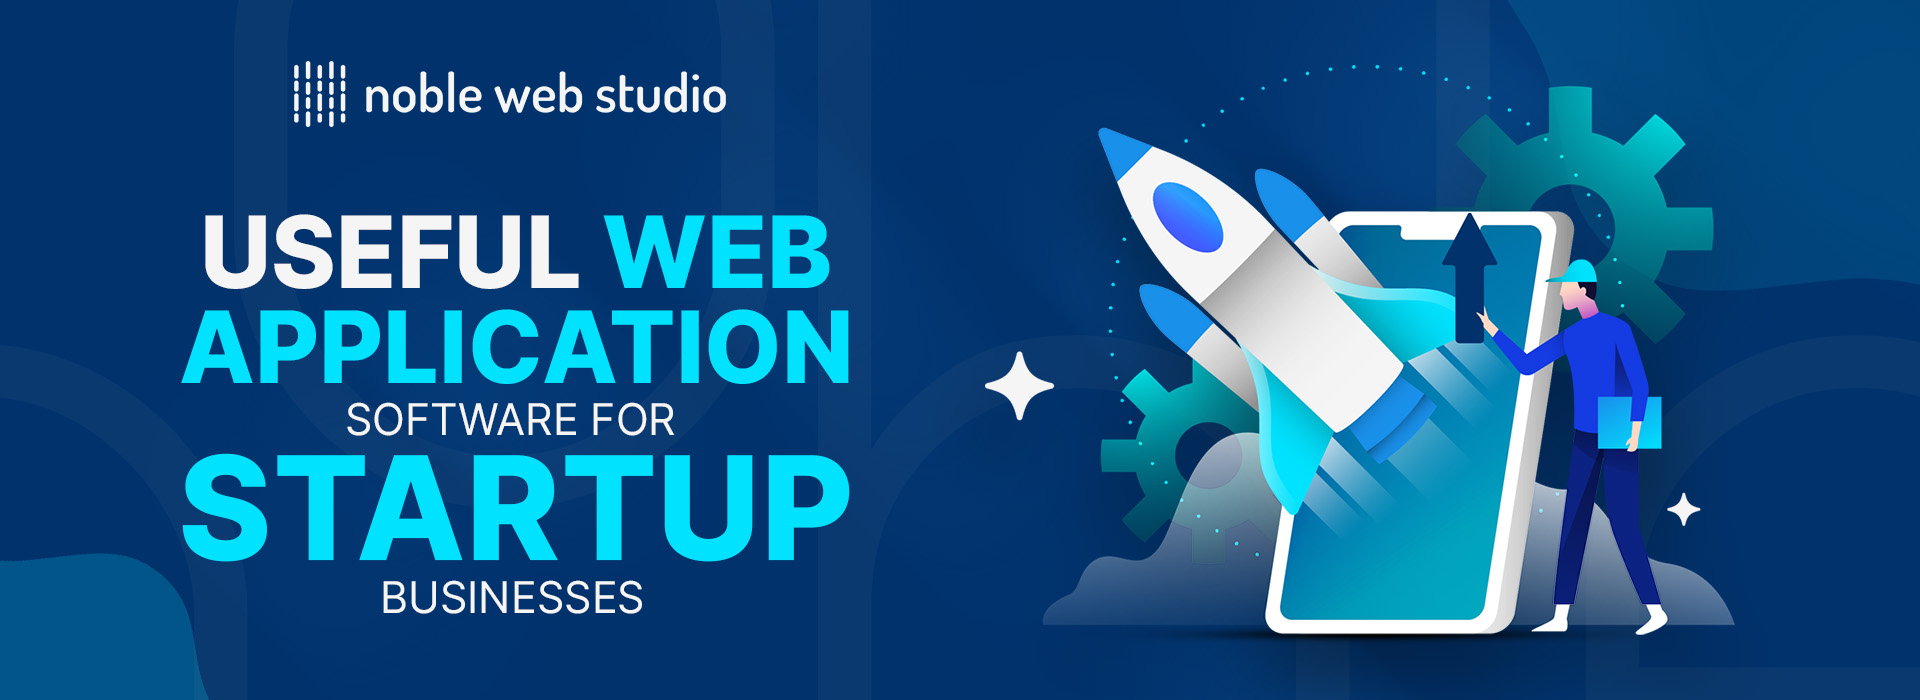 Useful Web Application Software for Startup Businesses